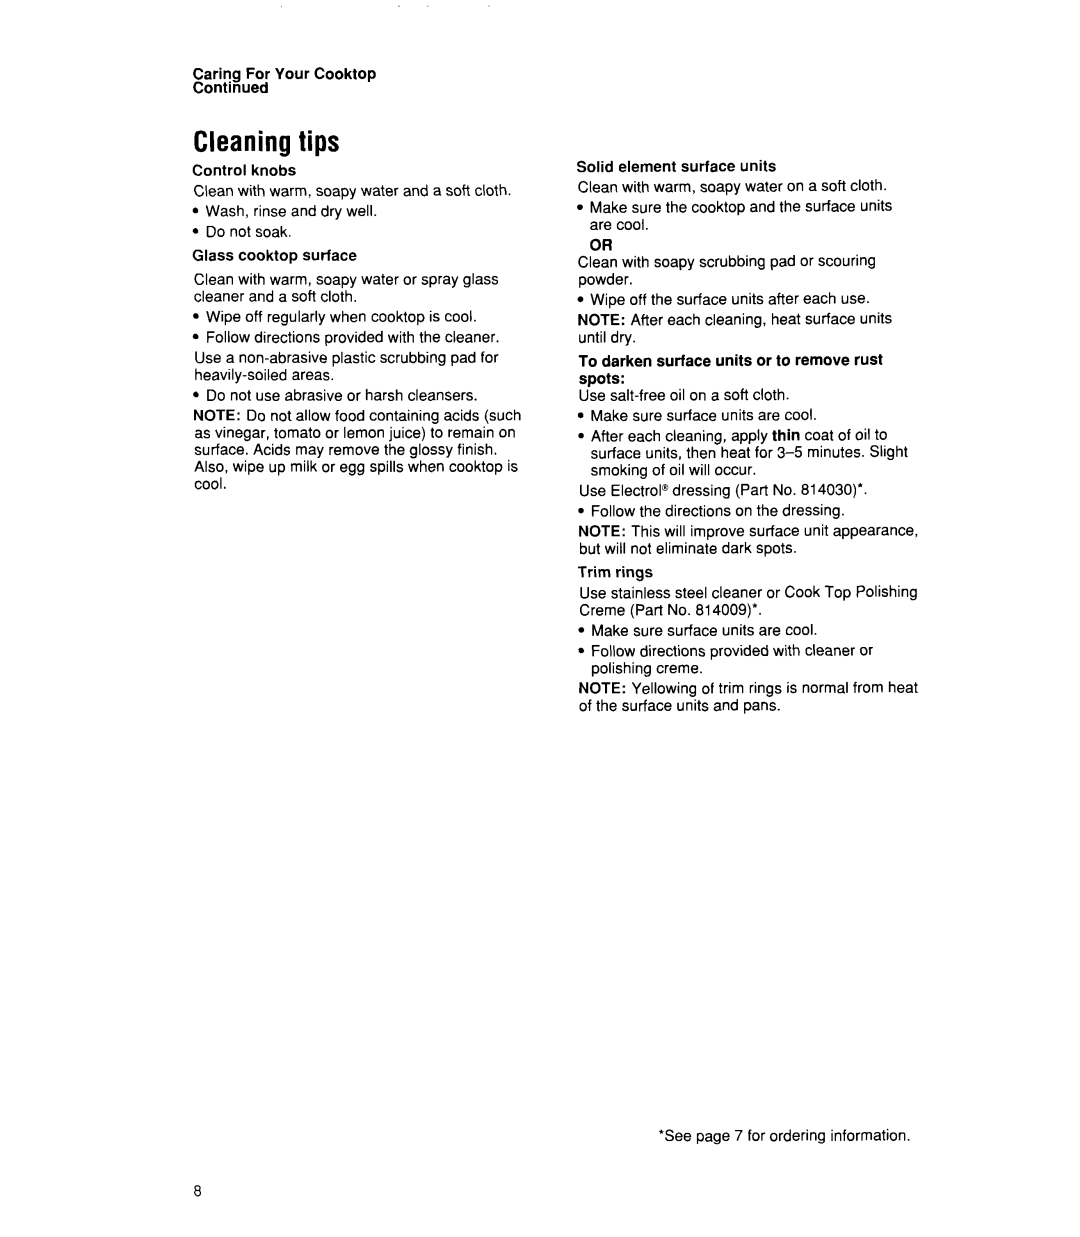 Whirlpool RC8330XT manual Cleaning tips 